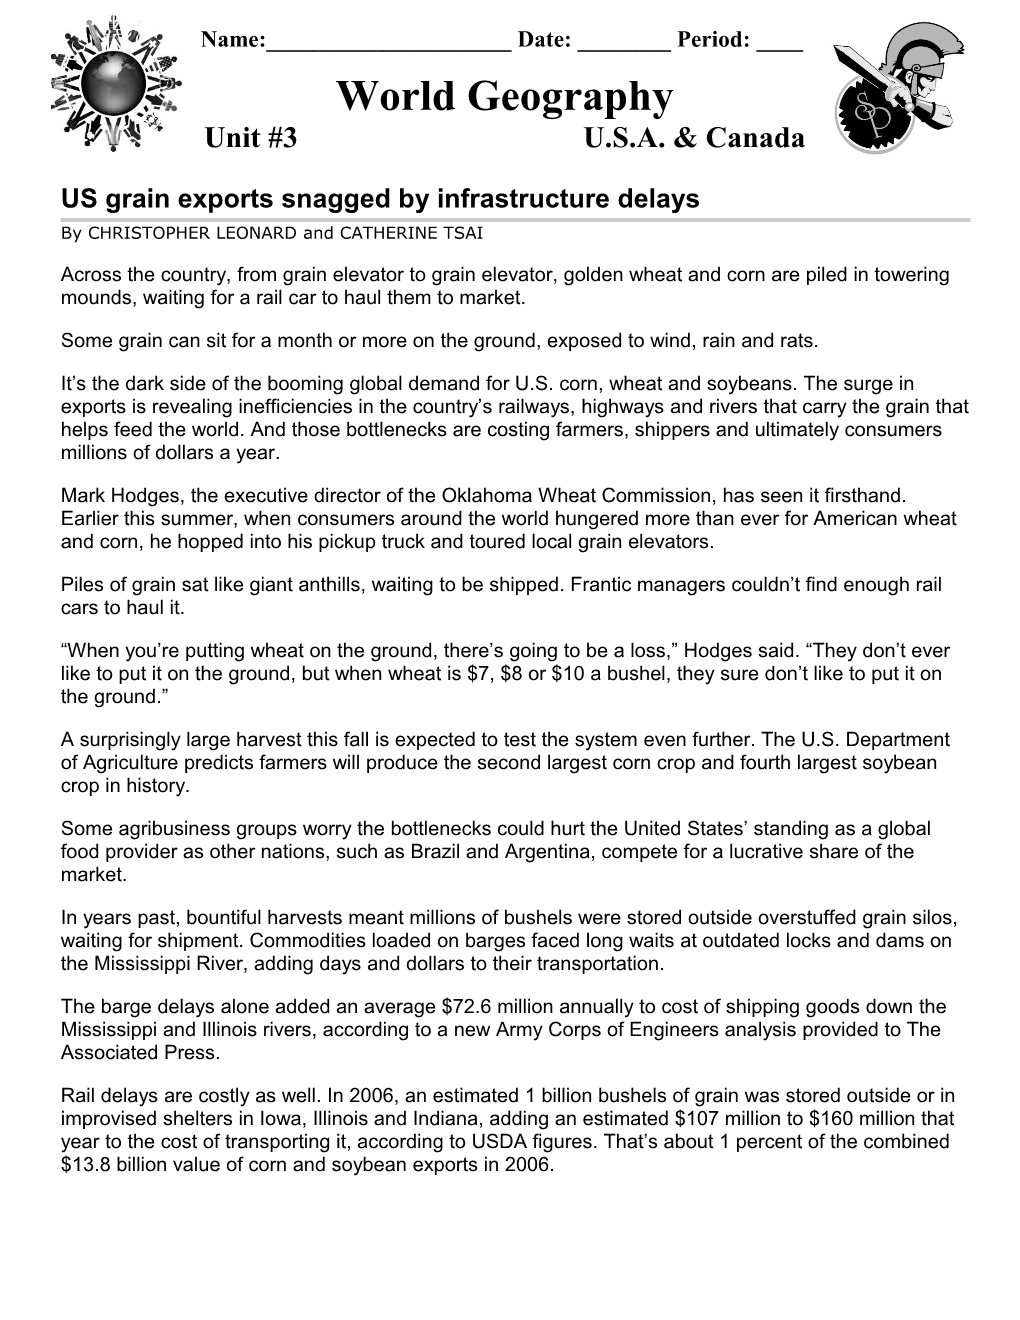 US Grain Exports Snagged by Infrastructure Delays